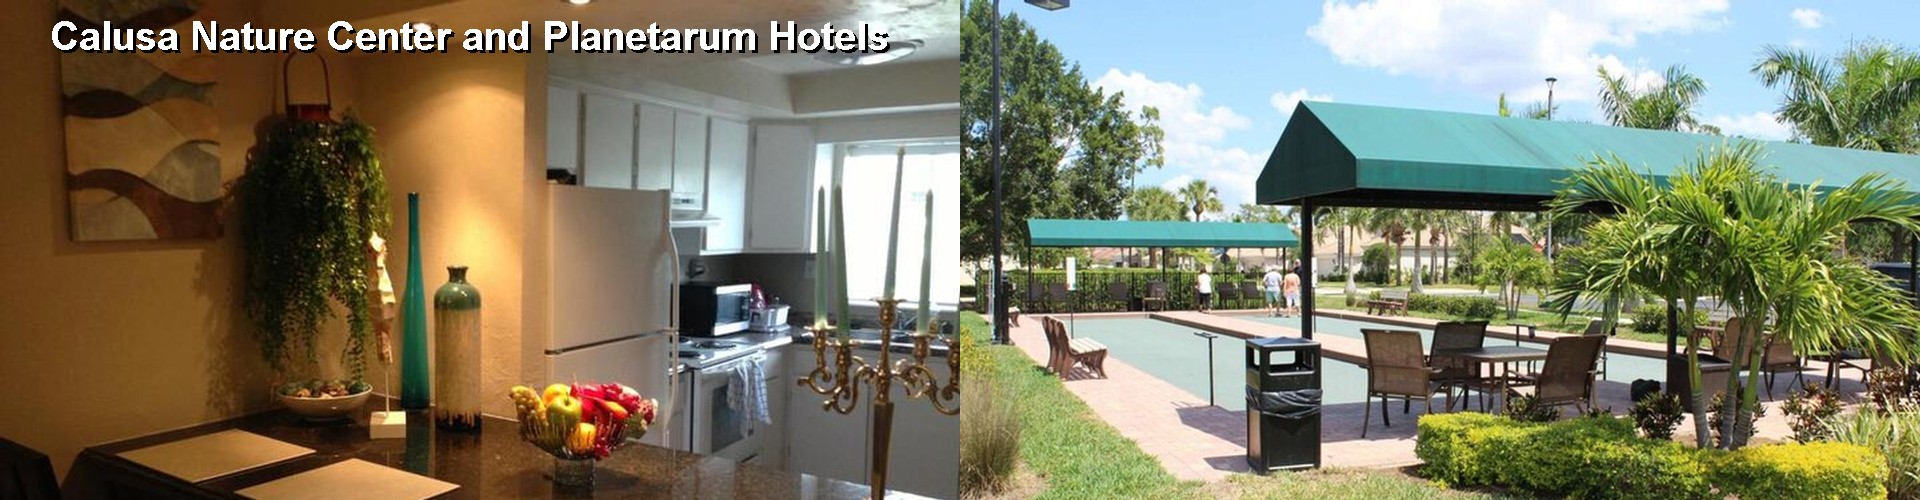 5 Best Hotels near Calusa Nature Center and Planetarum